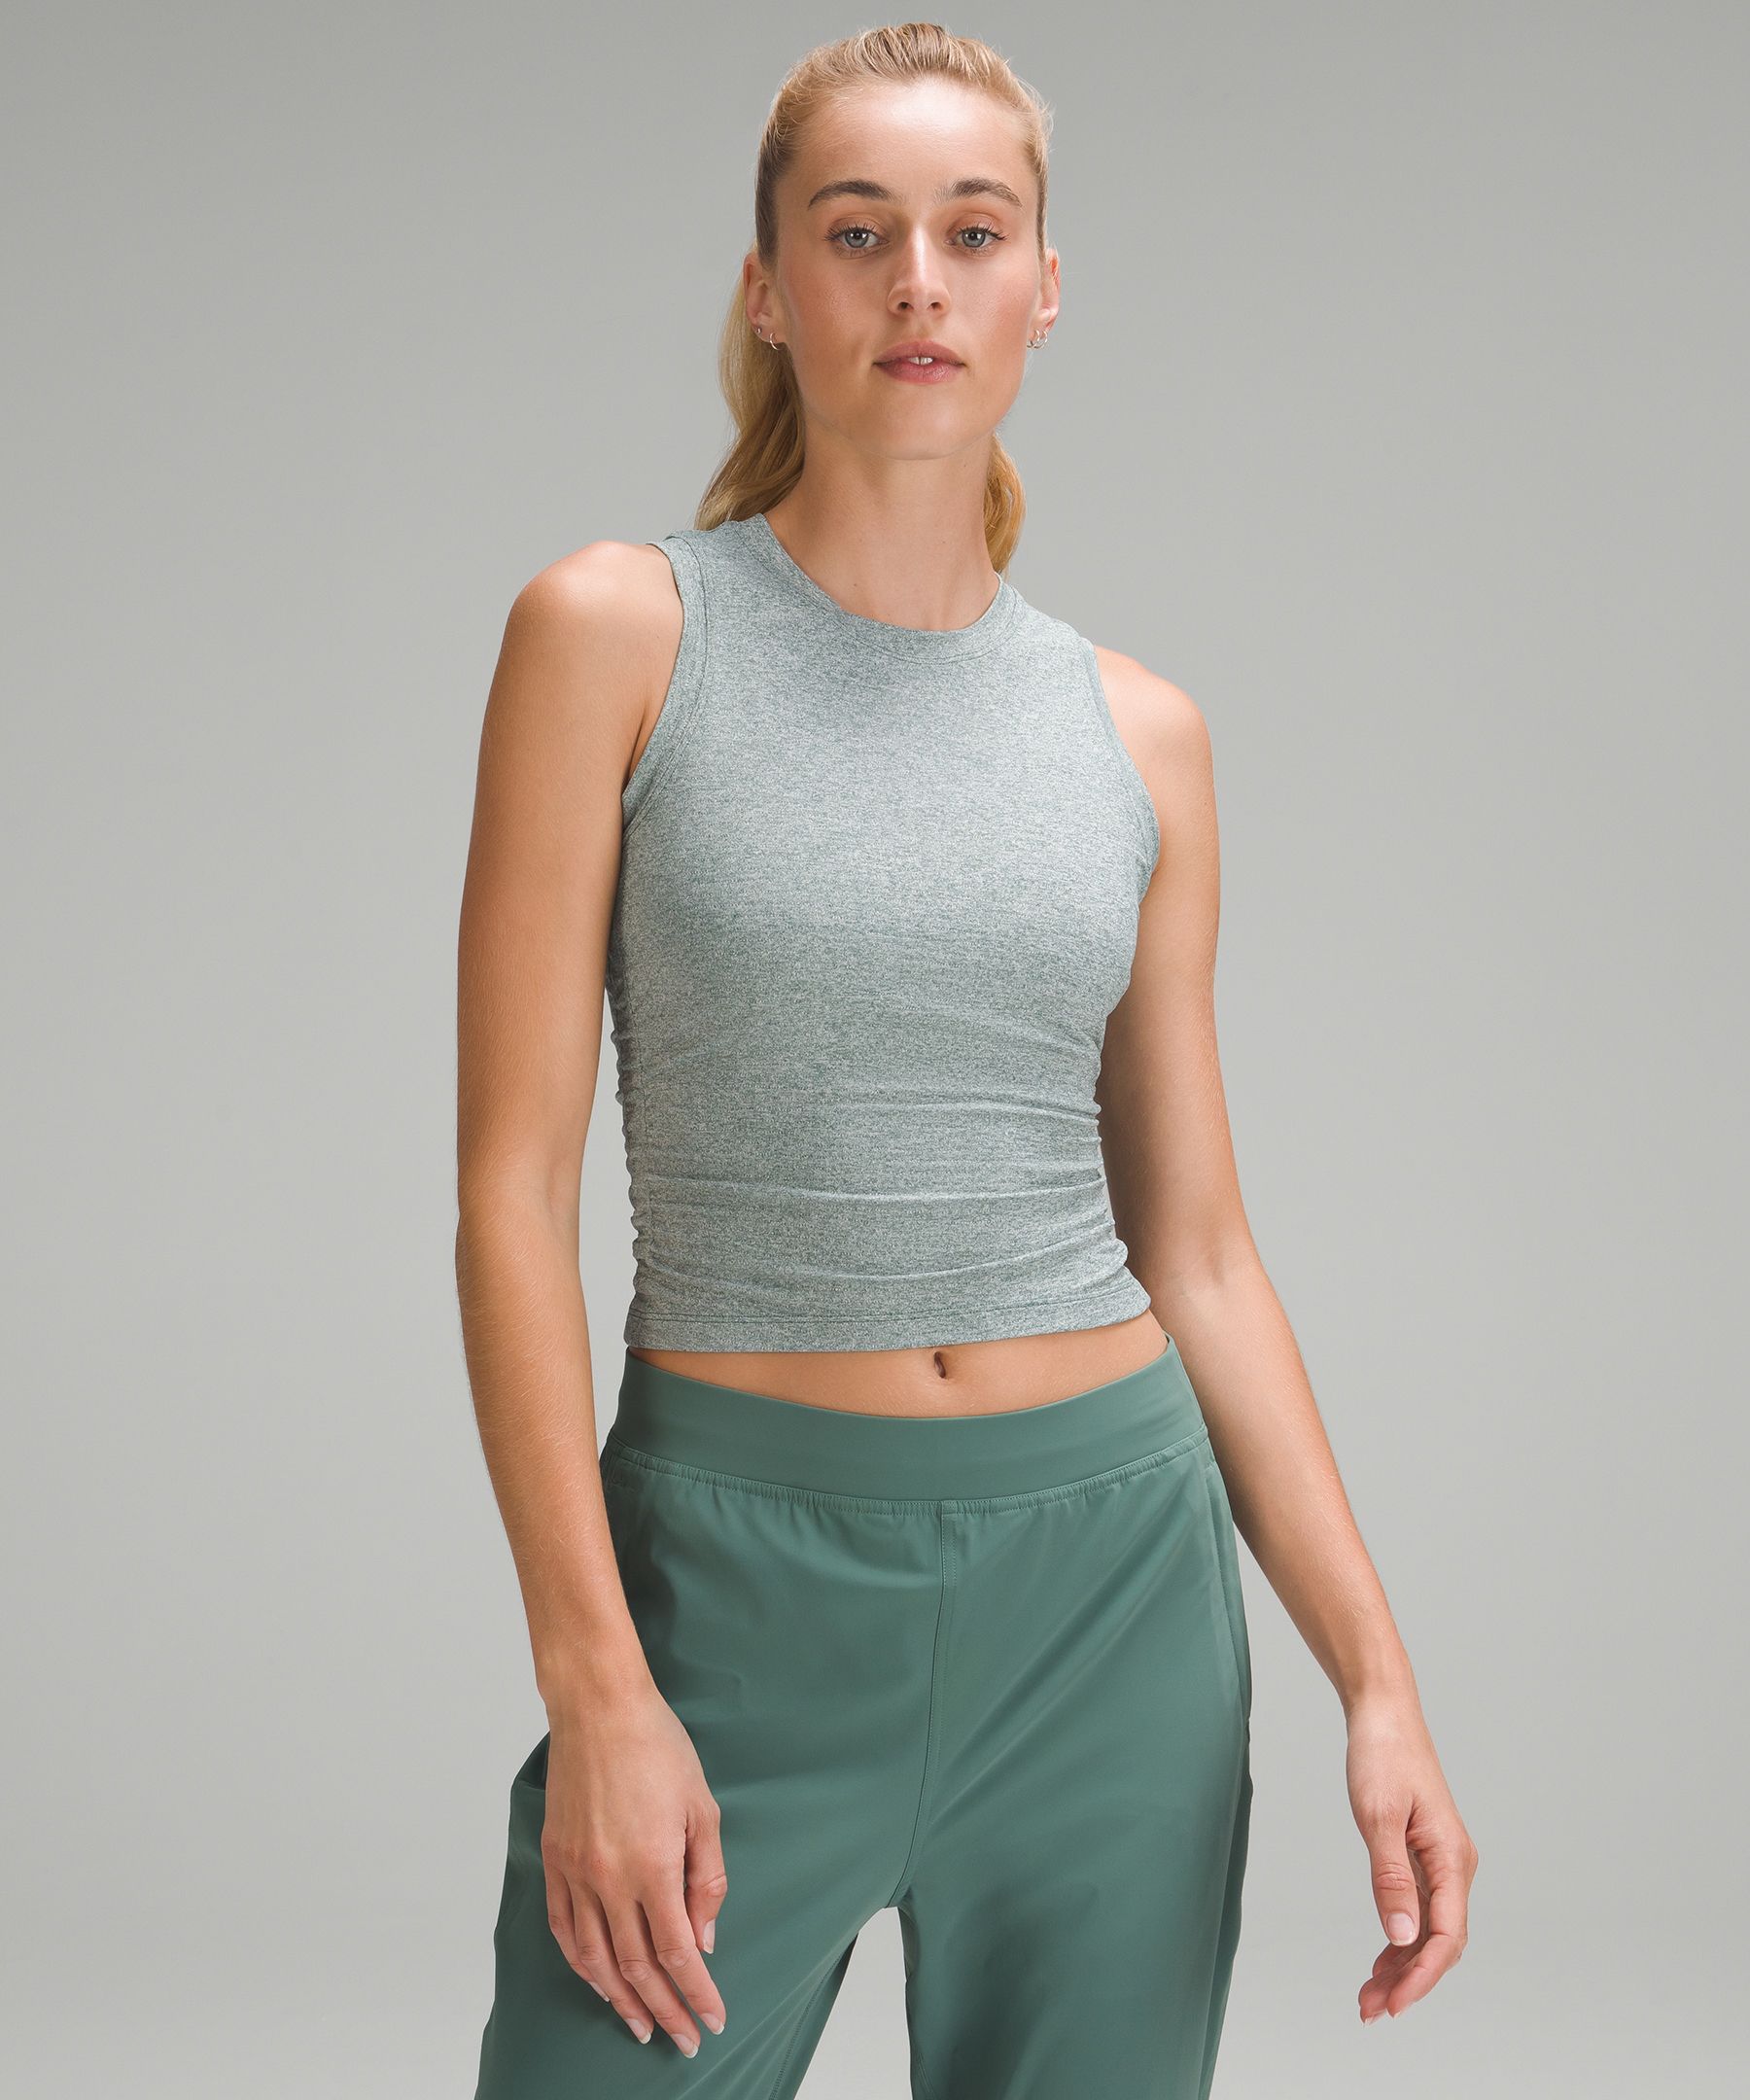 Lululemon License To Train Tight-fit Tank Top